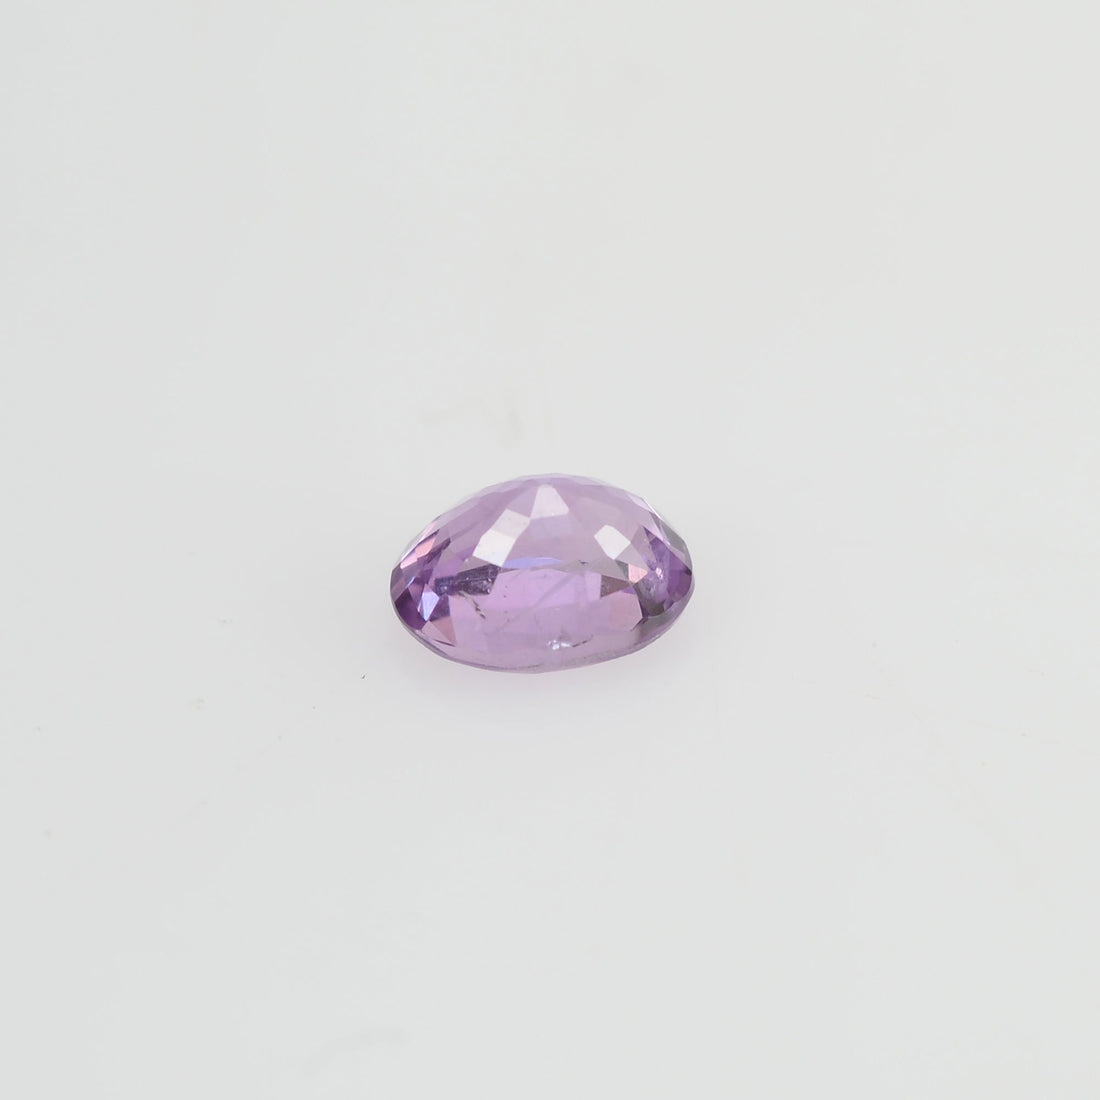 0.26 cts Natural Lavender Sapphire Loose Gemstone Oval Cut